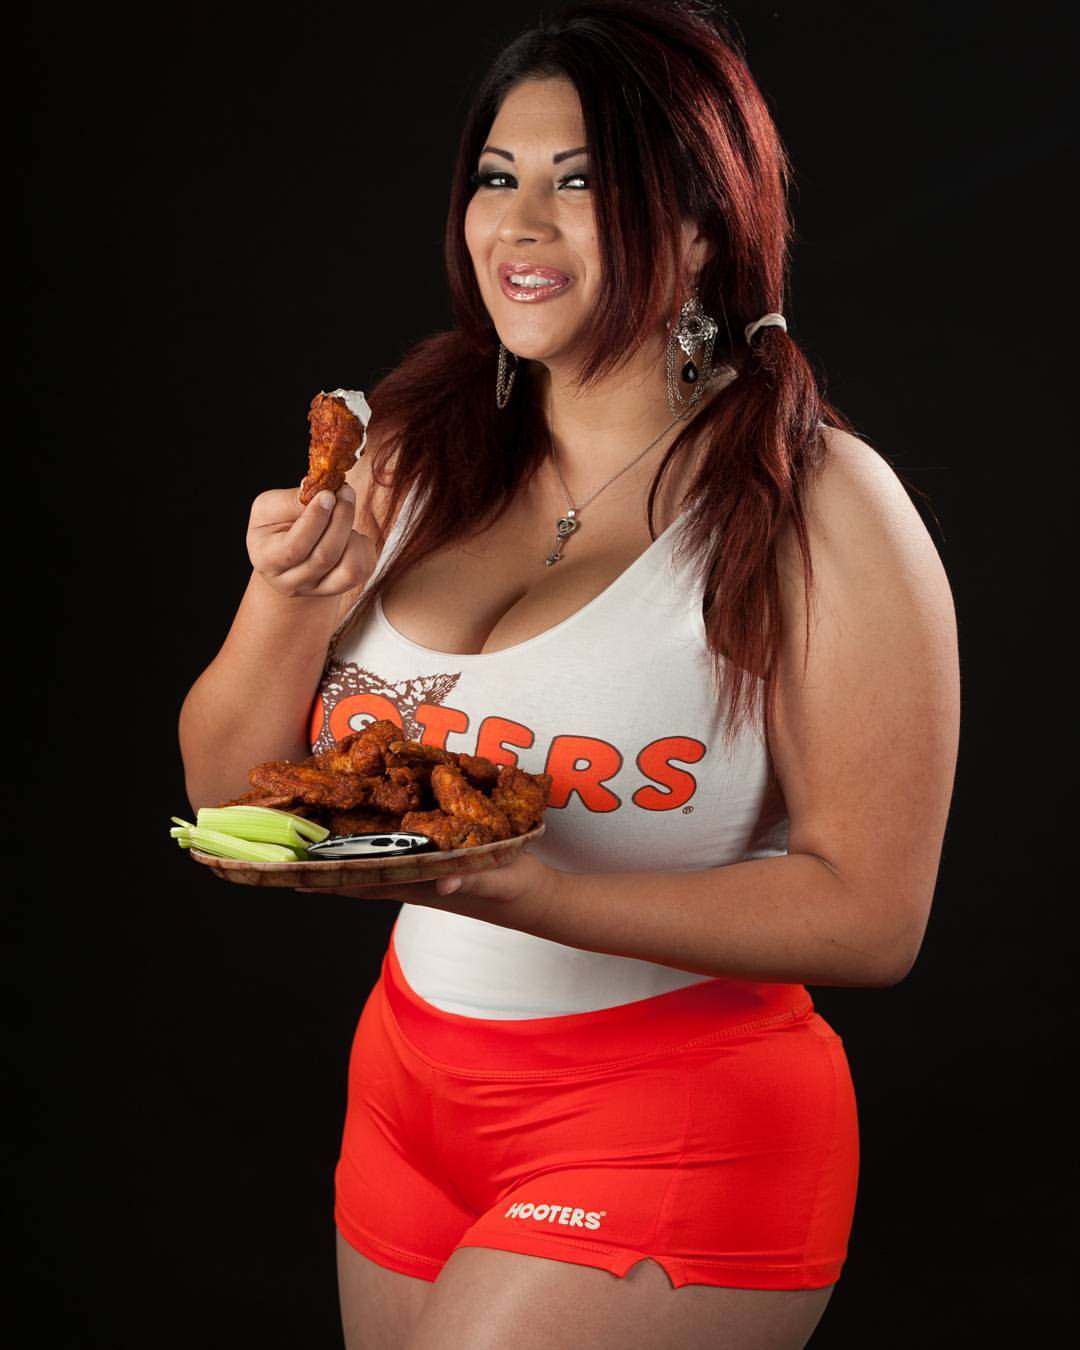 Hooters girls with wings lingerie free sex